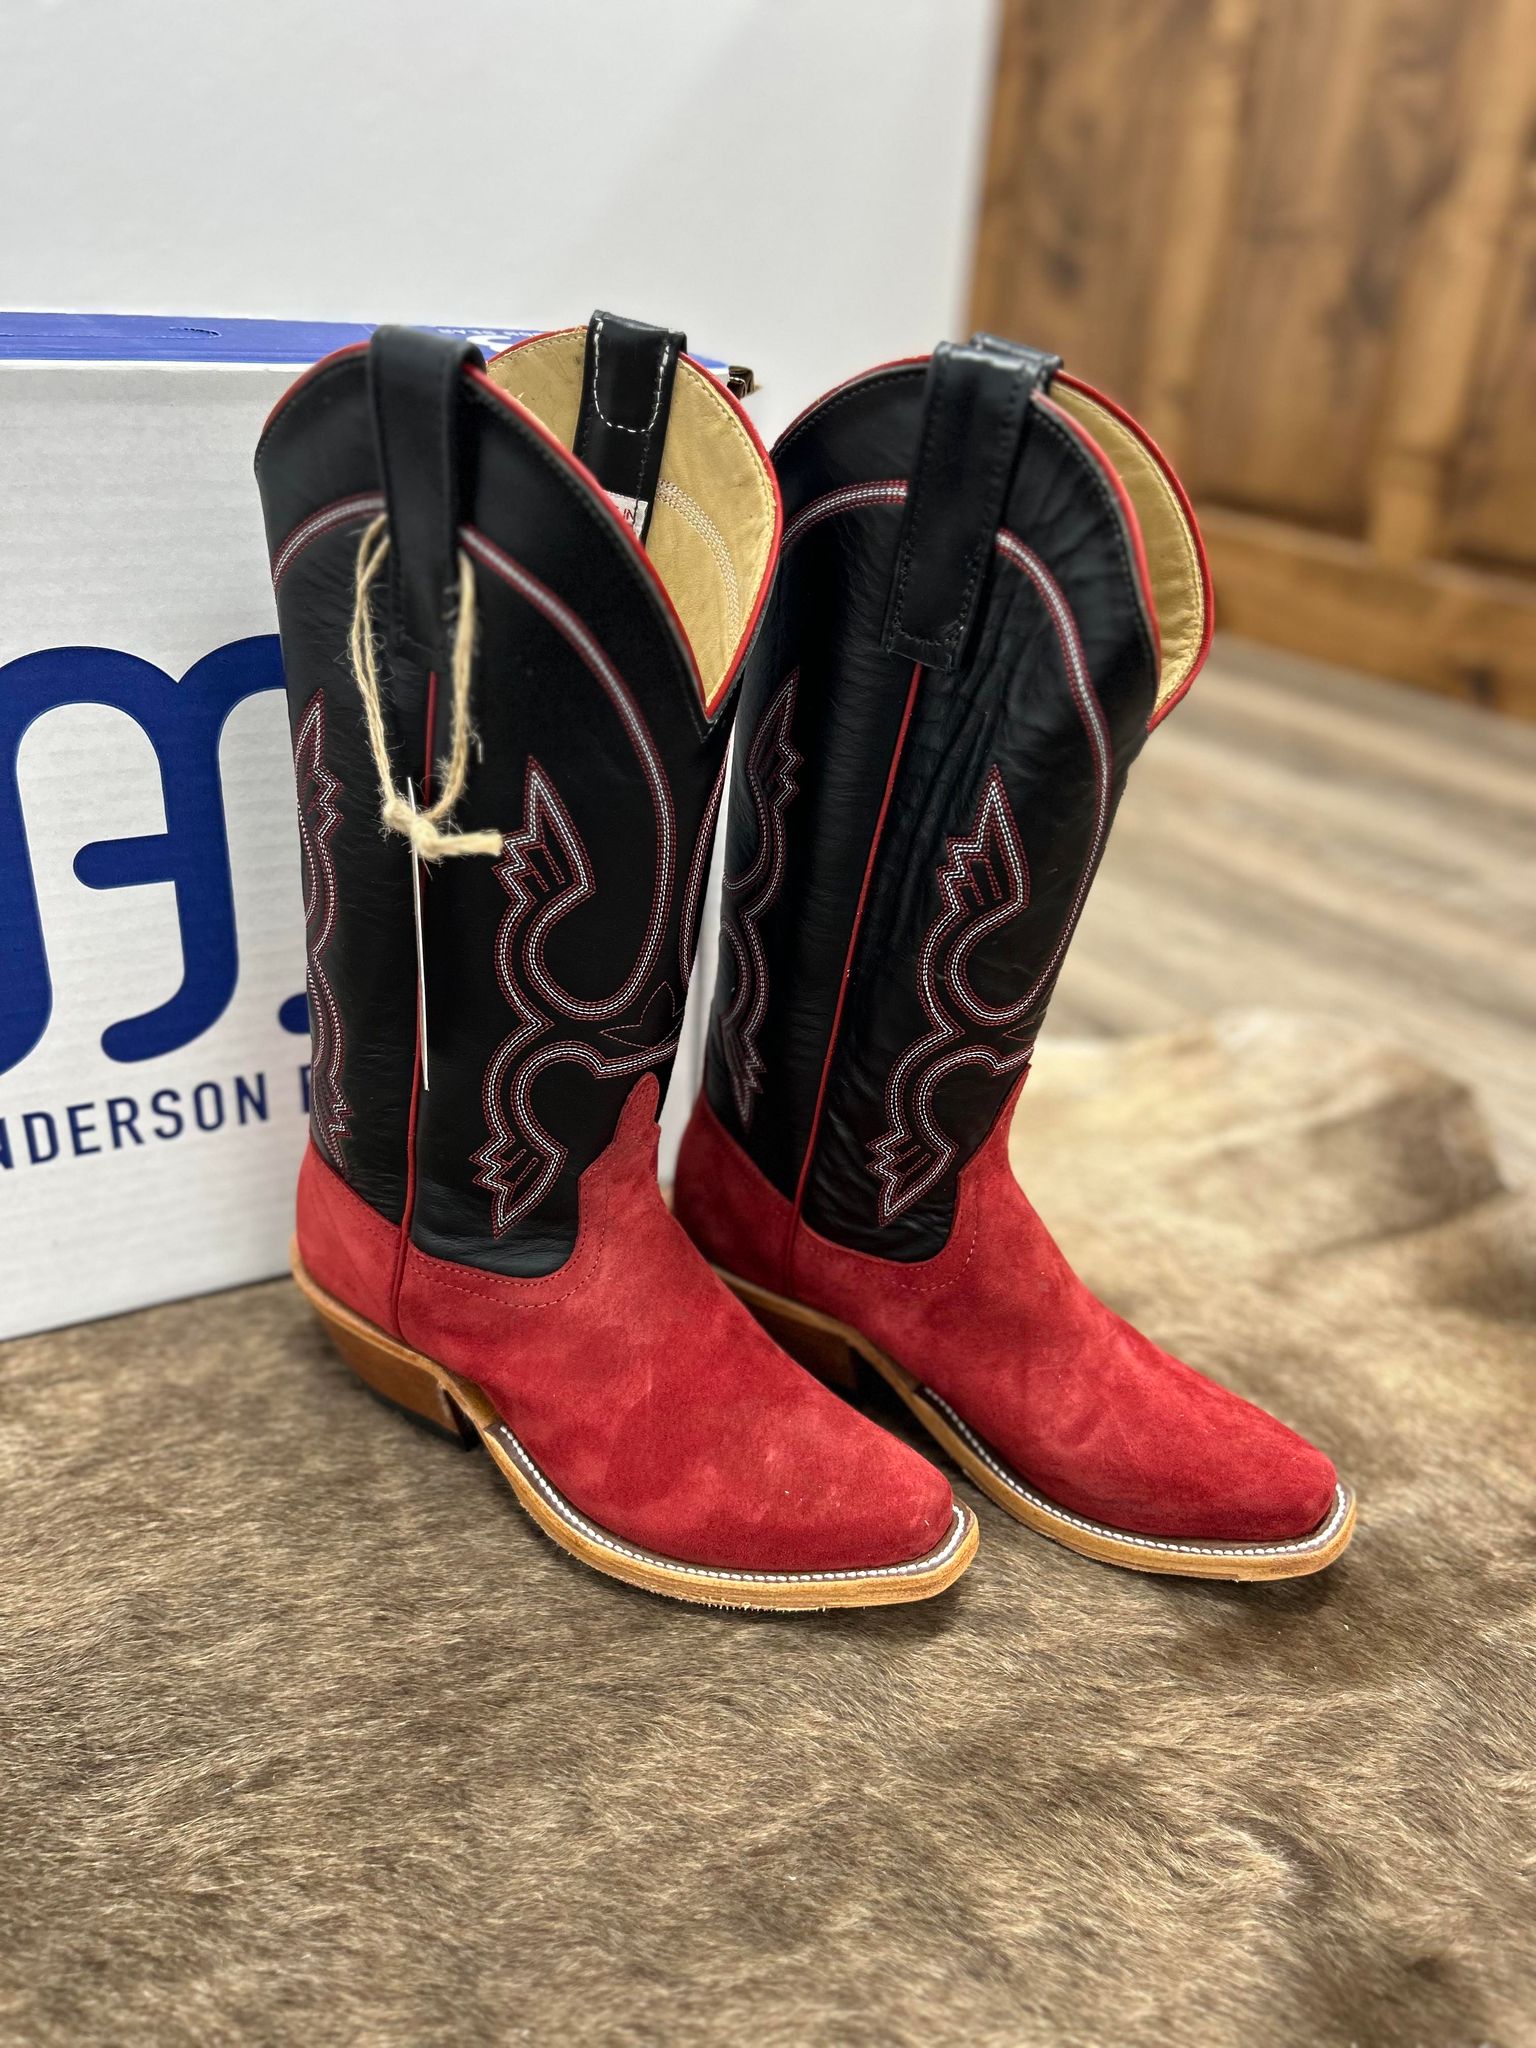 Anderson Bean Fire Bird Bacon & Black Glove Boots-Women's Boots-Anderson Bean-Lucky J Boots & More, Women's, Men's, & Kids Western Store Located in Carthage, MO